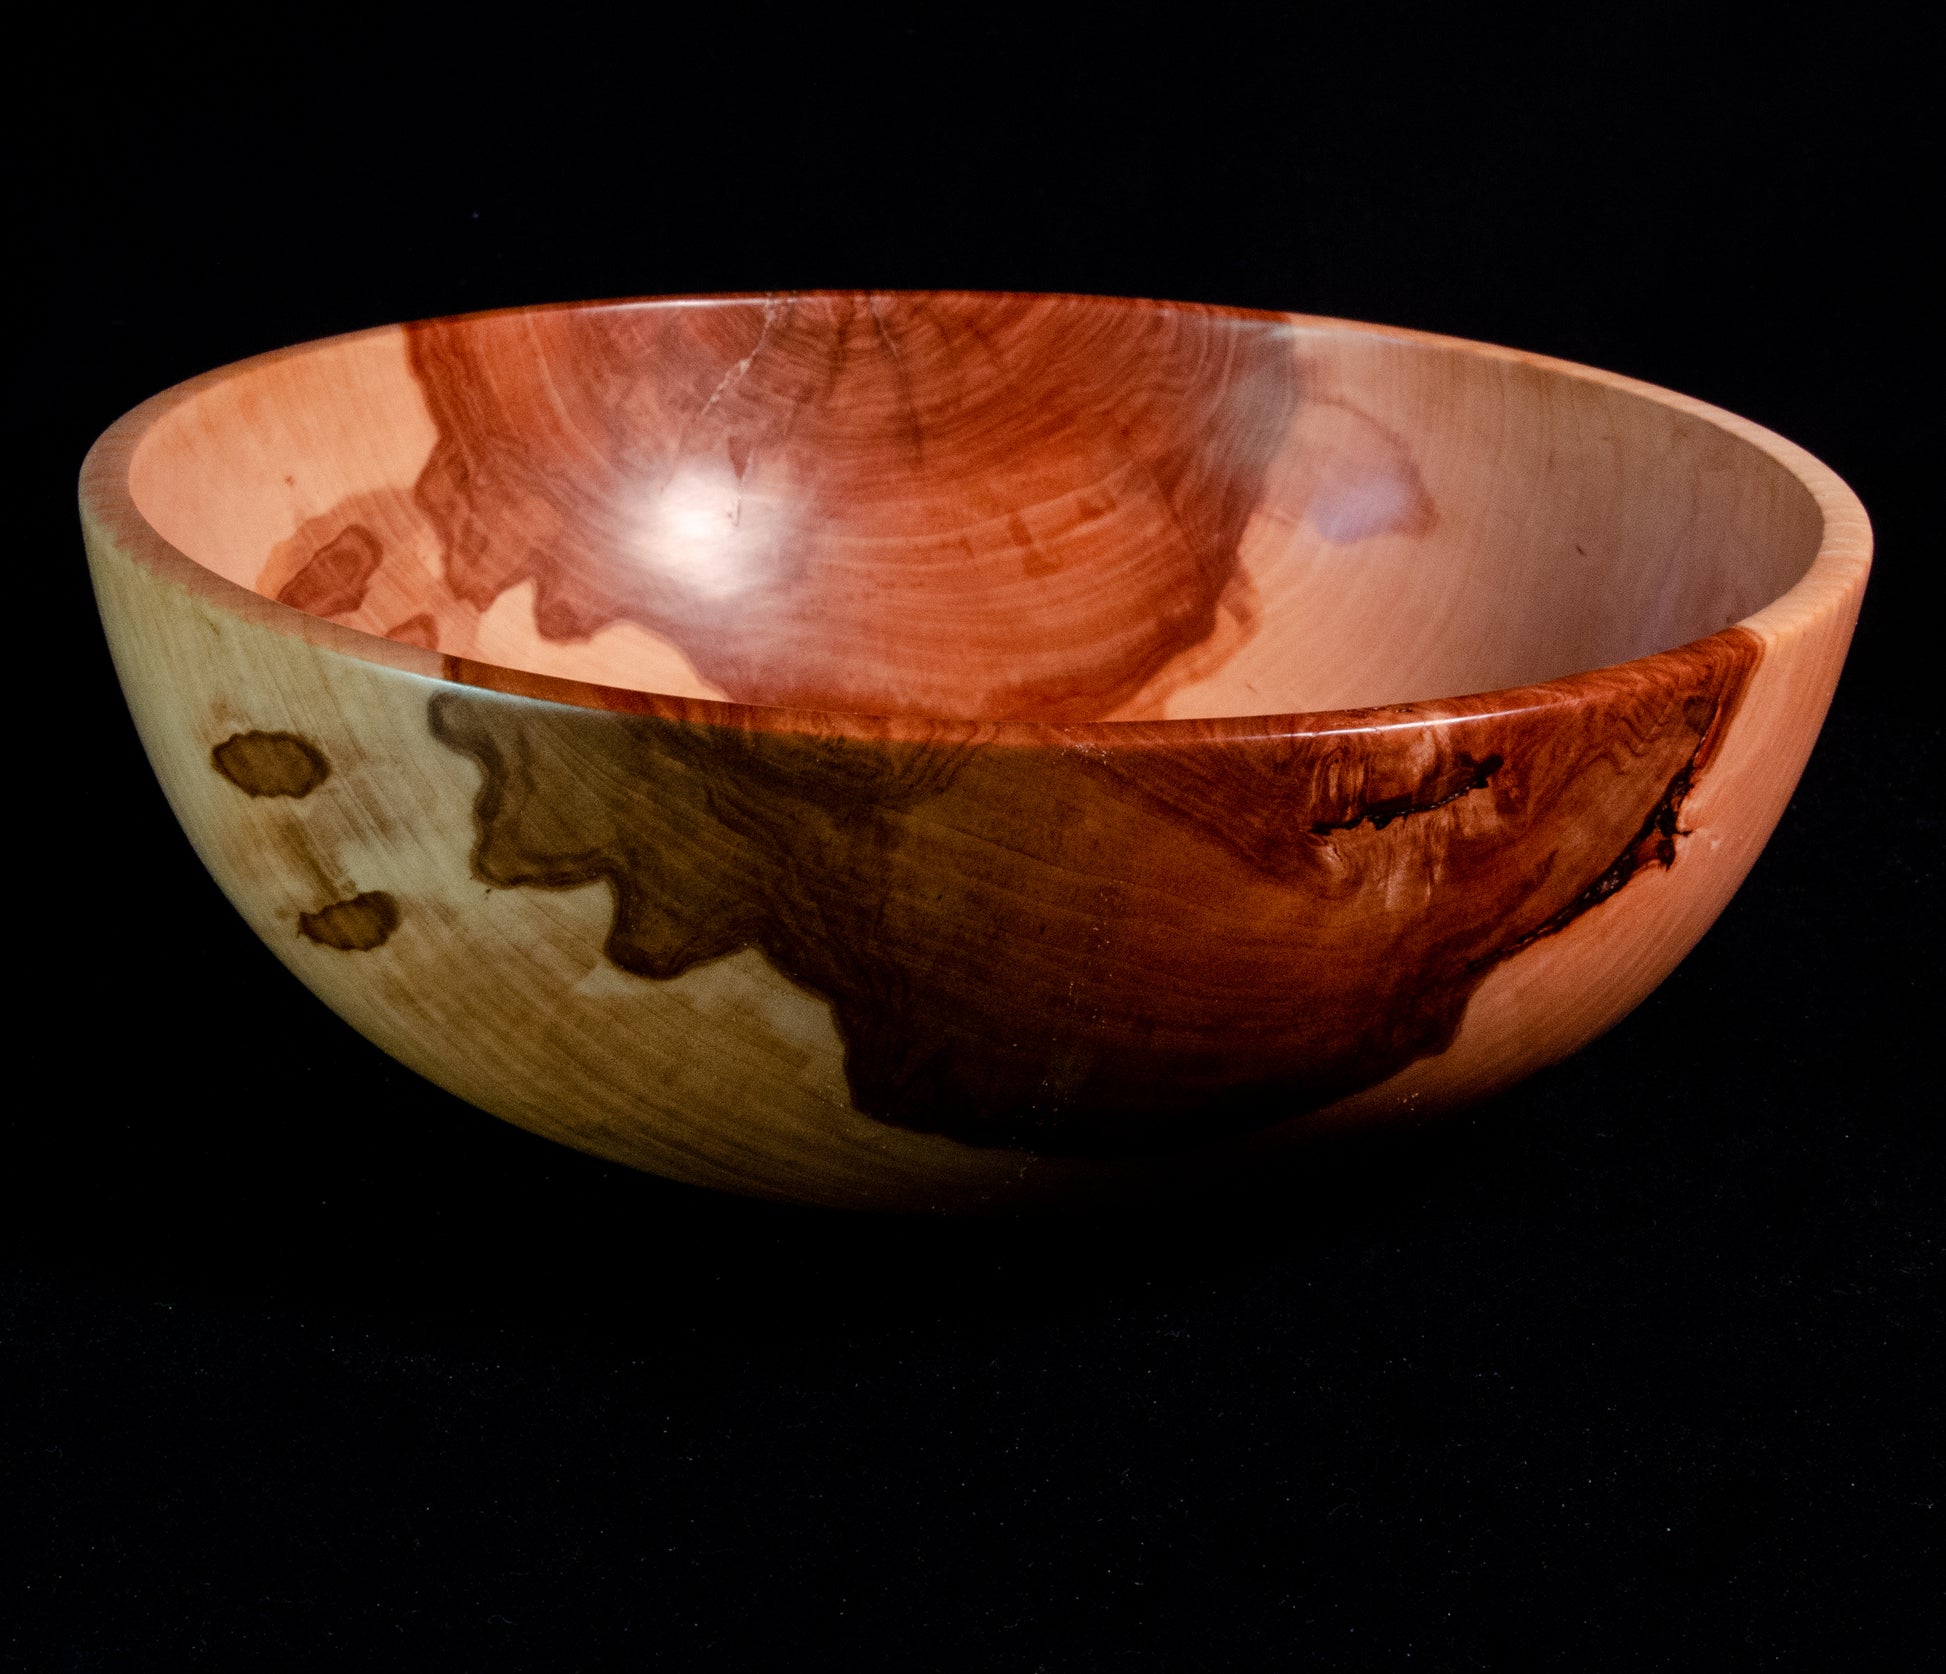 Medium aapple wood bowl with quilting pattern to the grain.  